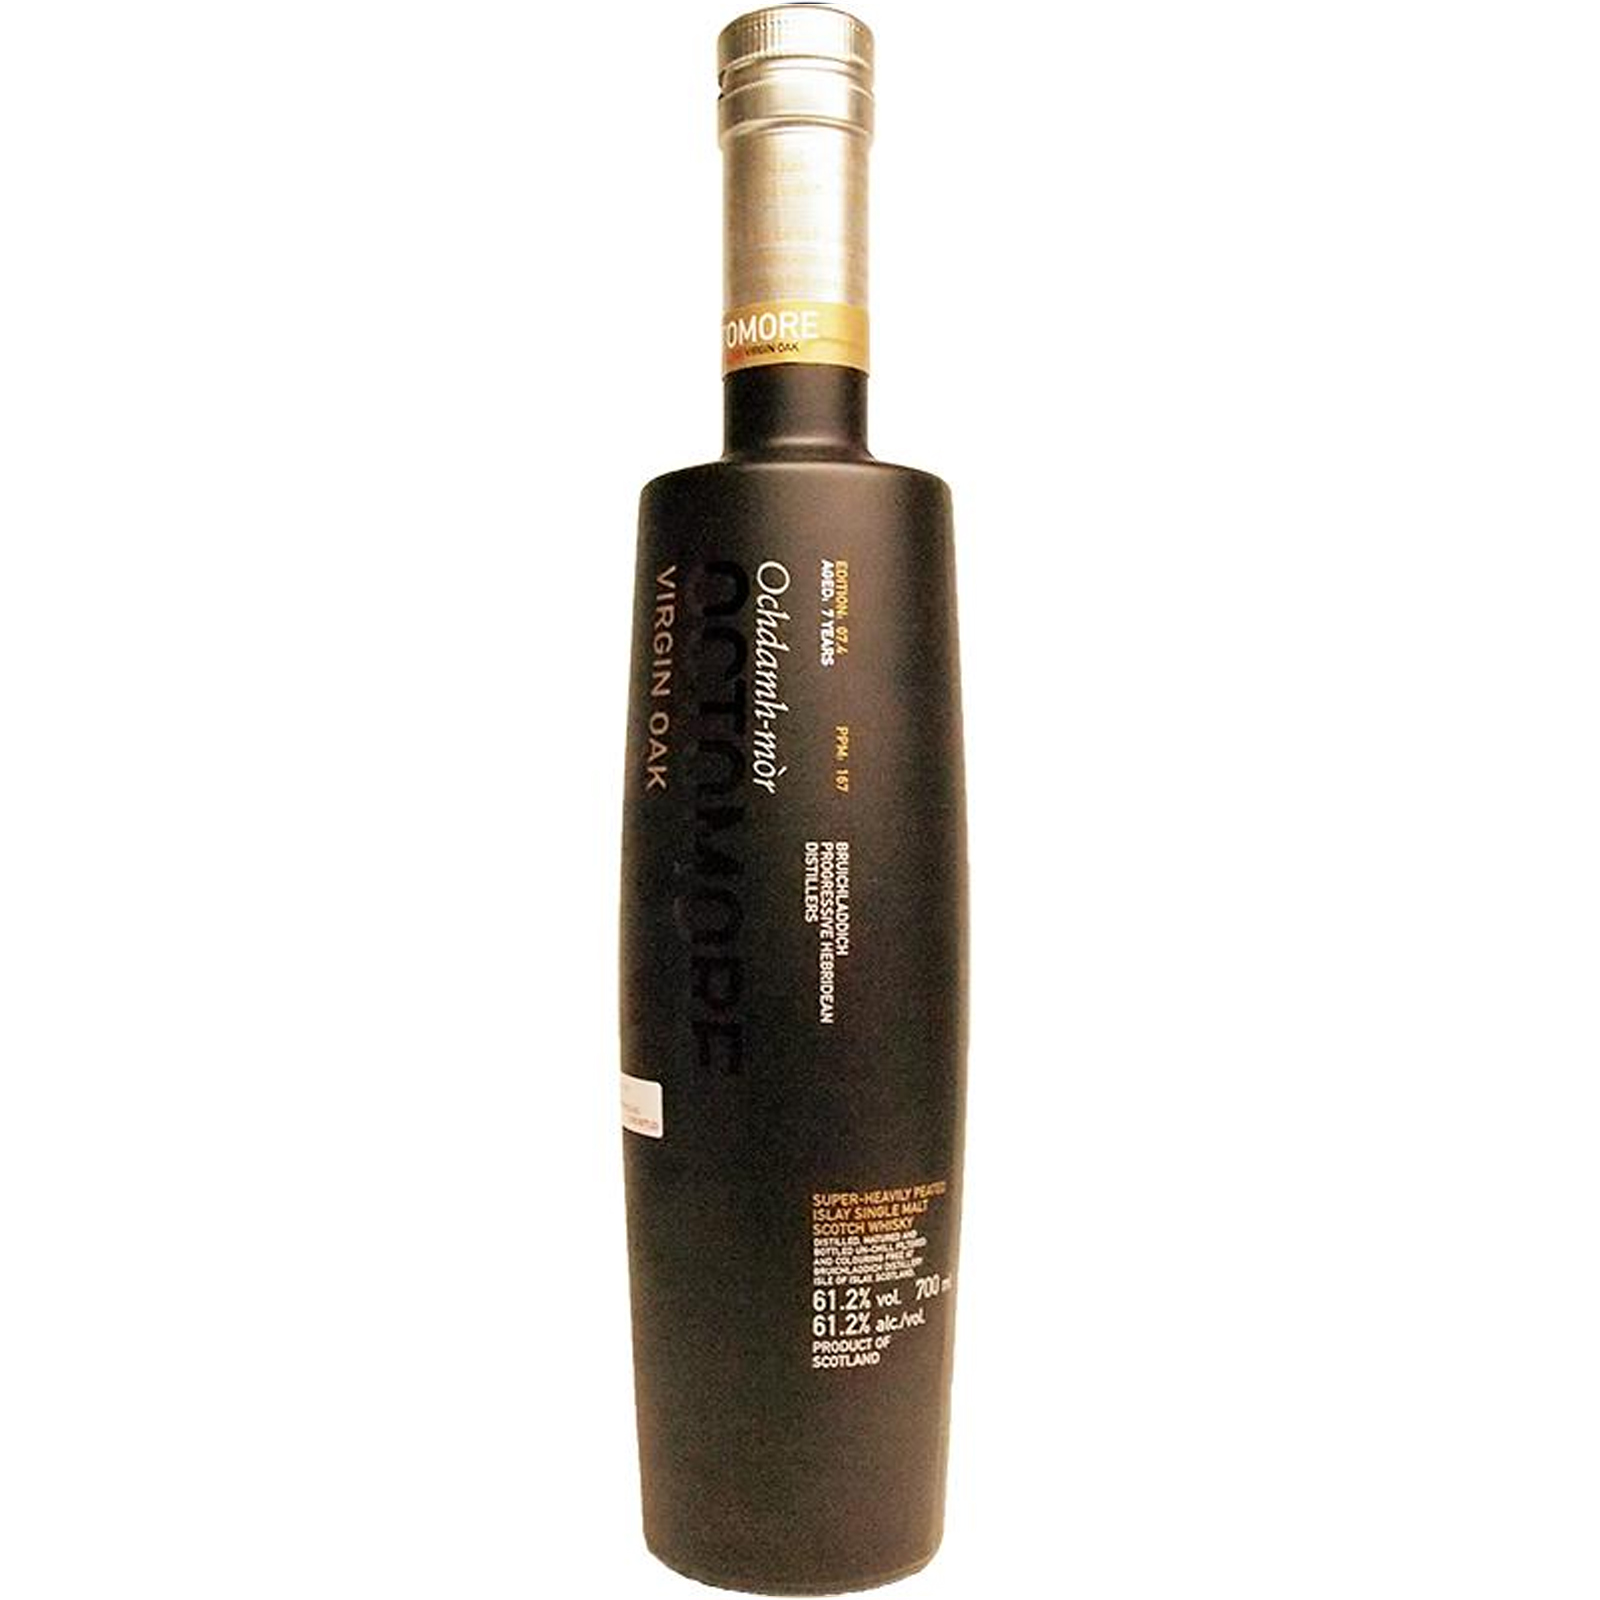 You are currently viewing Octomore 07.4